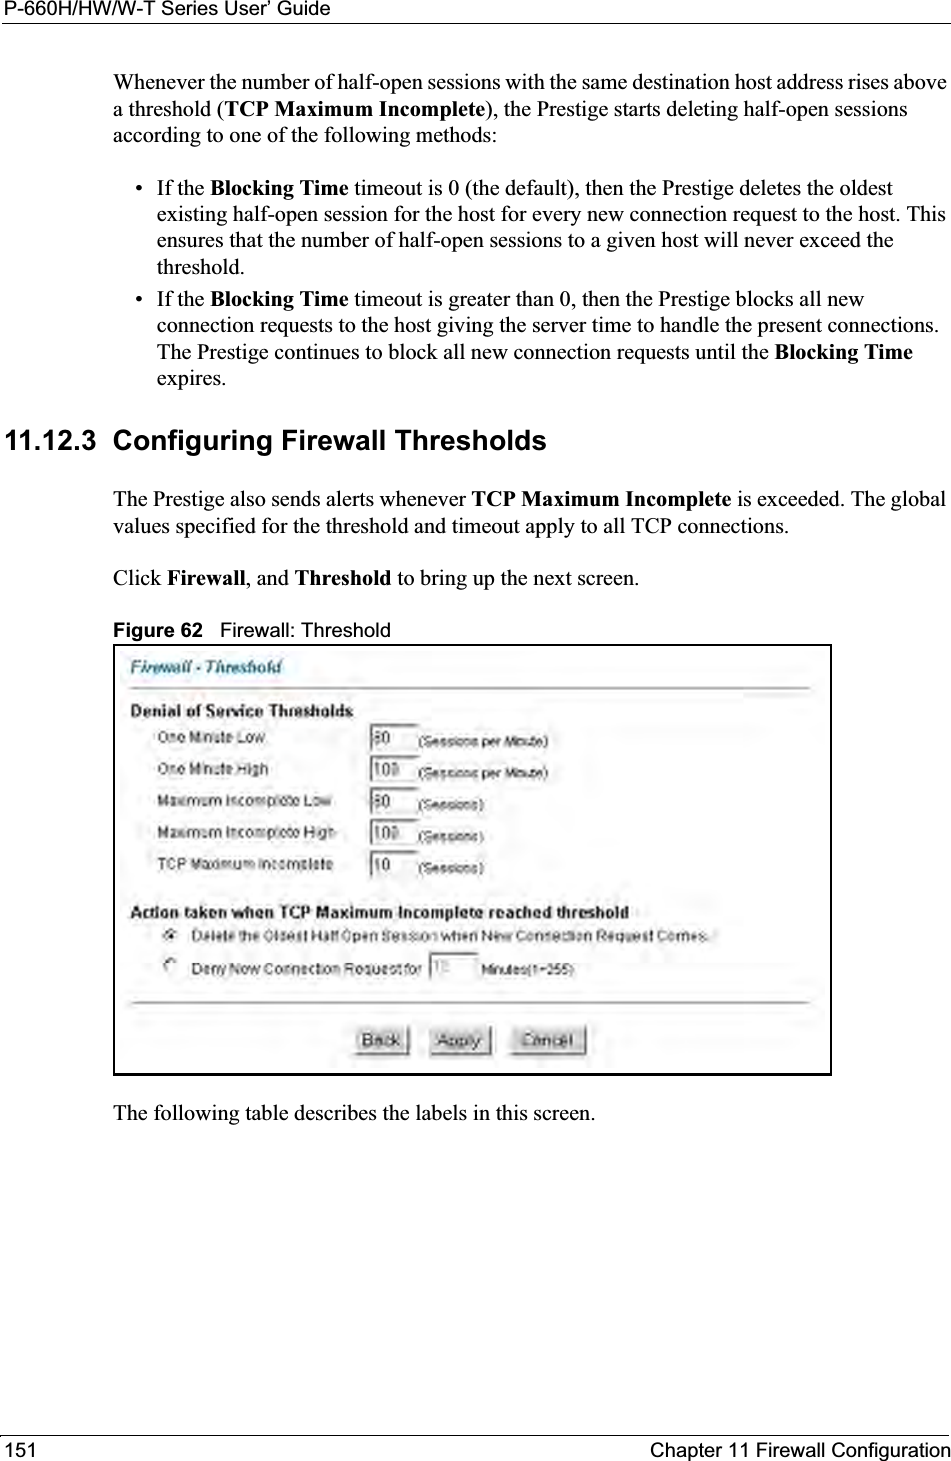 P-660H/HW/W-T Series User’ Guide151 Chapter 11 Firewall ConfigurationWhenever the number of half-open sessions with the same destination host address rises above a threshold (TCP Maximum Incomplete), the Prestige starts deleting half-open sessions according to one of the following methods:• If the Blocking Time timeout is 0 (the default), then the Prestige deletes the oldest existing half-open session for the host for every new connection request to the host. This ensures that the number of half-open sessions to a given host will never exceed the threshold.• If the Blocking Time timeout is greater than 0, then the Prestige blocks all new connection requests to the host giving the server time to handle the present connections. The Prestige continues to block all new connection requests until the Blocking Timeexpires. 11.12.3  Configuring Firewall Thresholds The Prestige also sends alerts whenever TCP Maximum Incomplete is exceeded. The global values specified for the threshold and timeout apply to all TCP connections. Click Firewall, and Threshold to bring up the next screen.Figure 62   Firewall: ThresholdThe following table describes the labels in this screen.